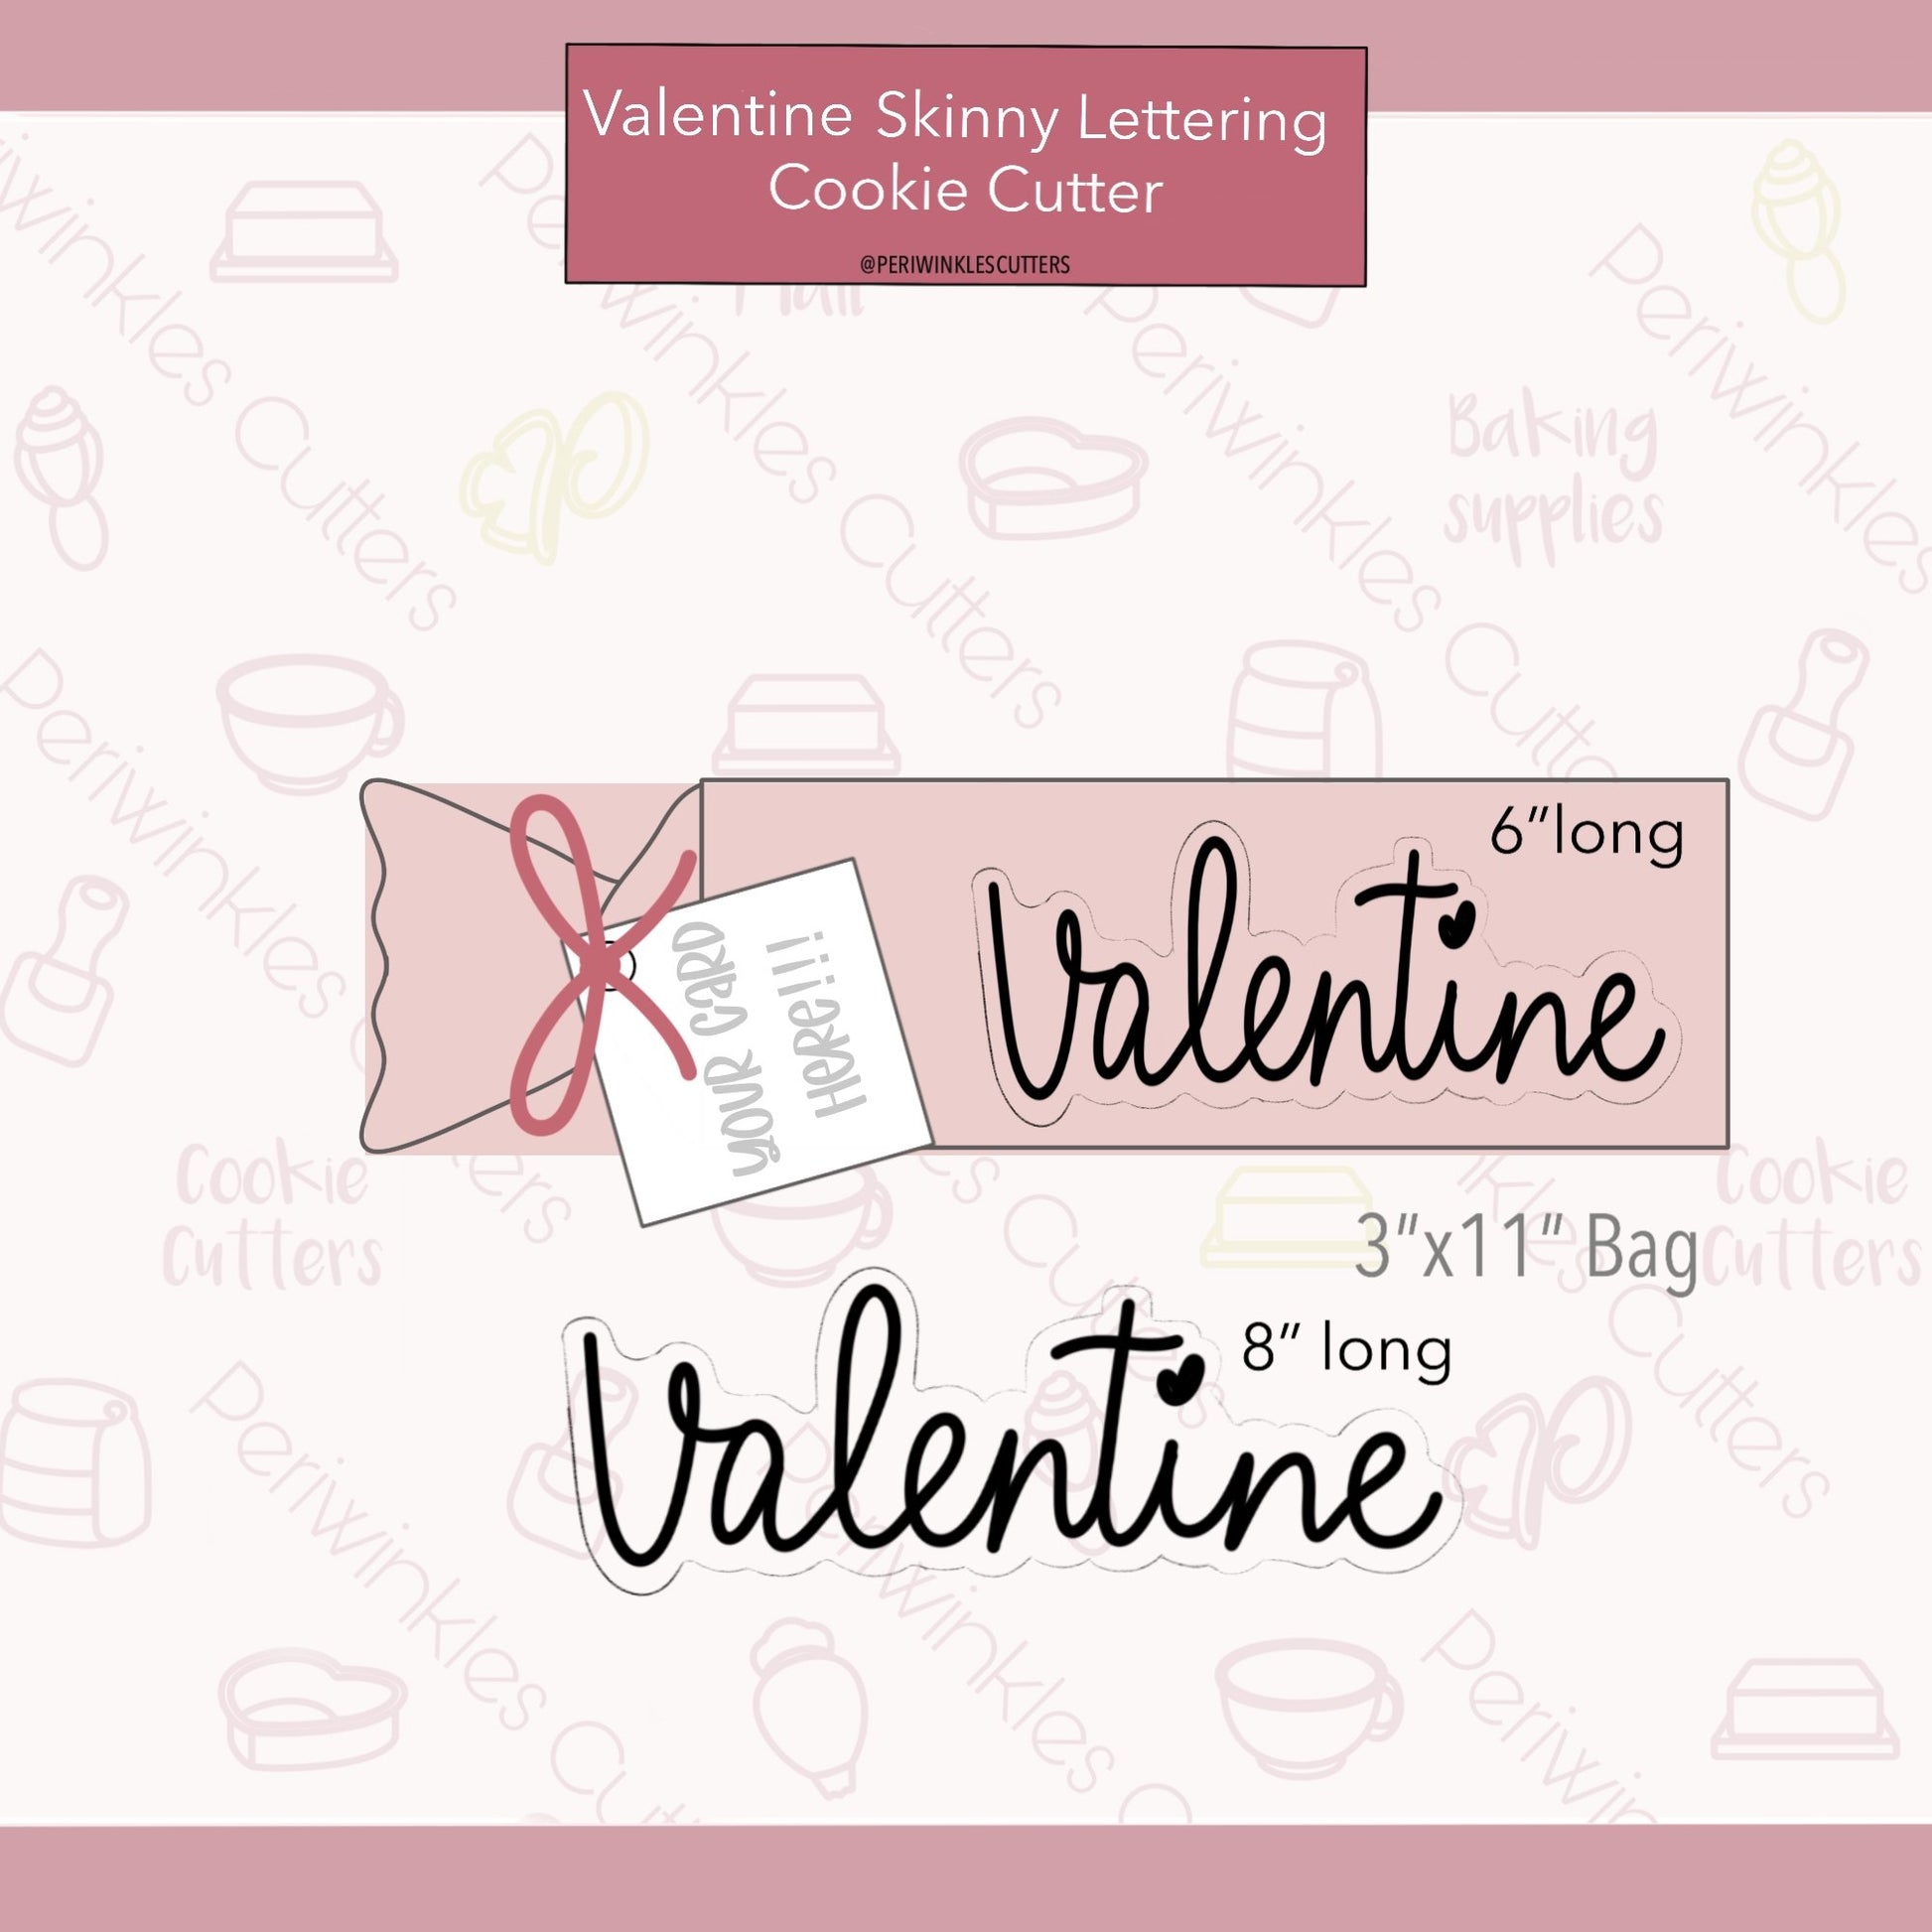 Valentine Skinny Lettering Cookie Cutter - Periwinkles Cutters